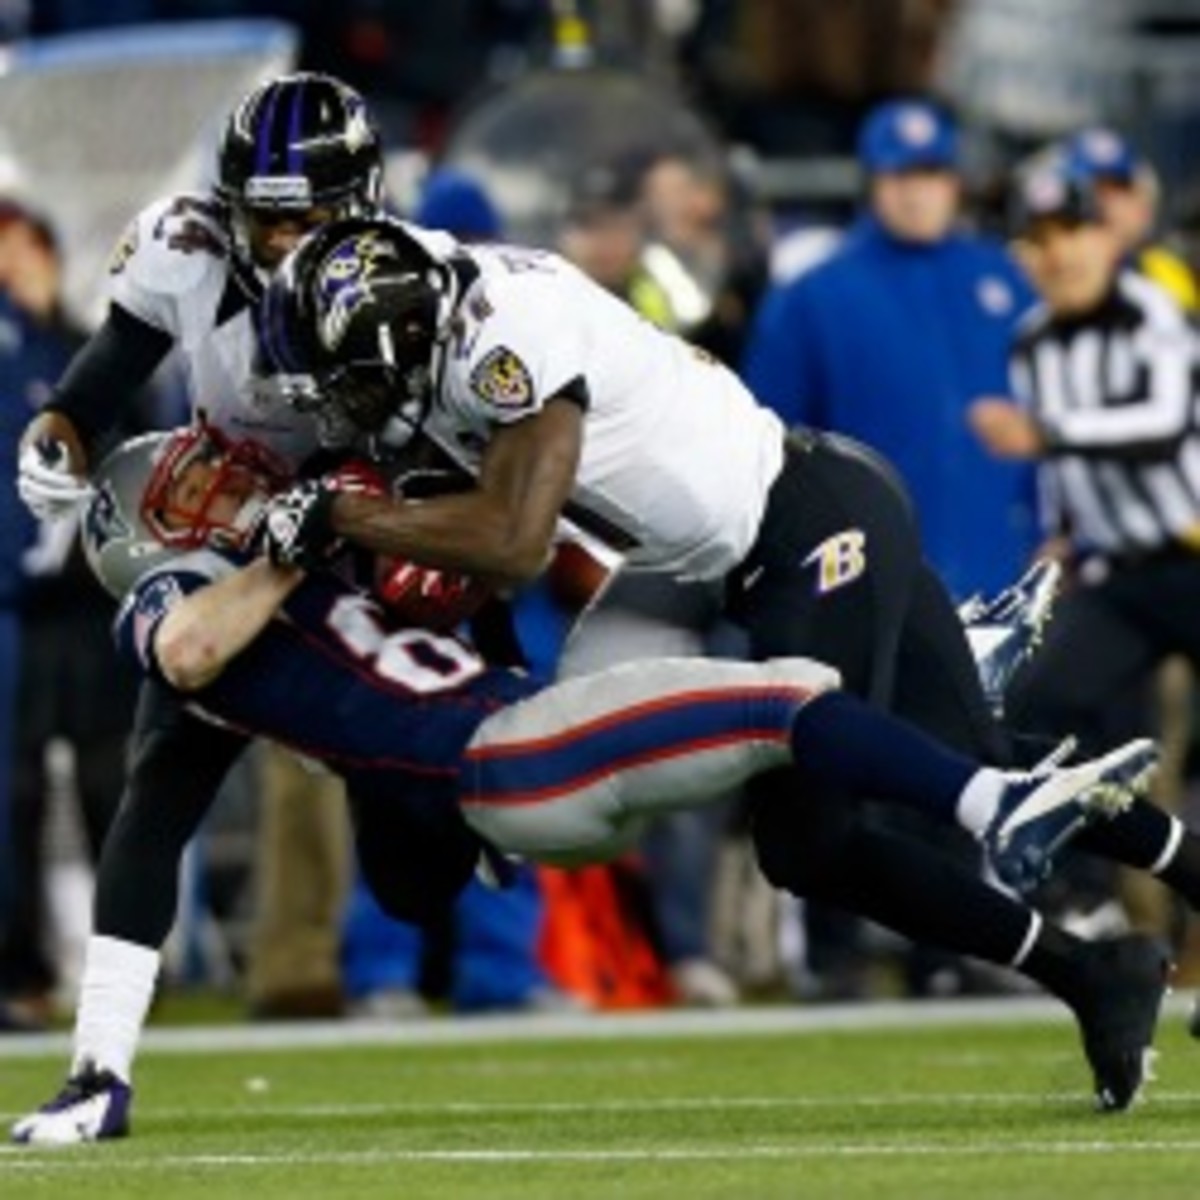 Ravens safety Bernard Pollard was fined for a hit on Wes Welker during Sunday's AFC Championship Game. (Jared Wickerham/Getty Images)